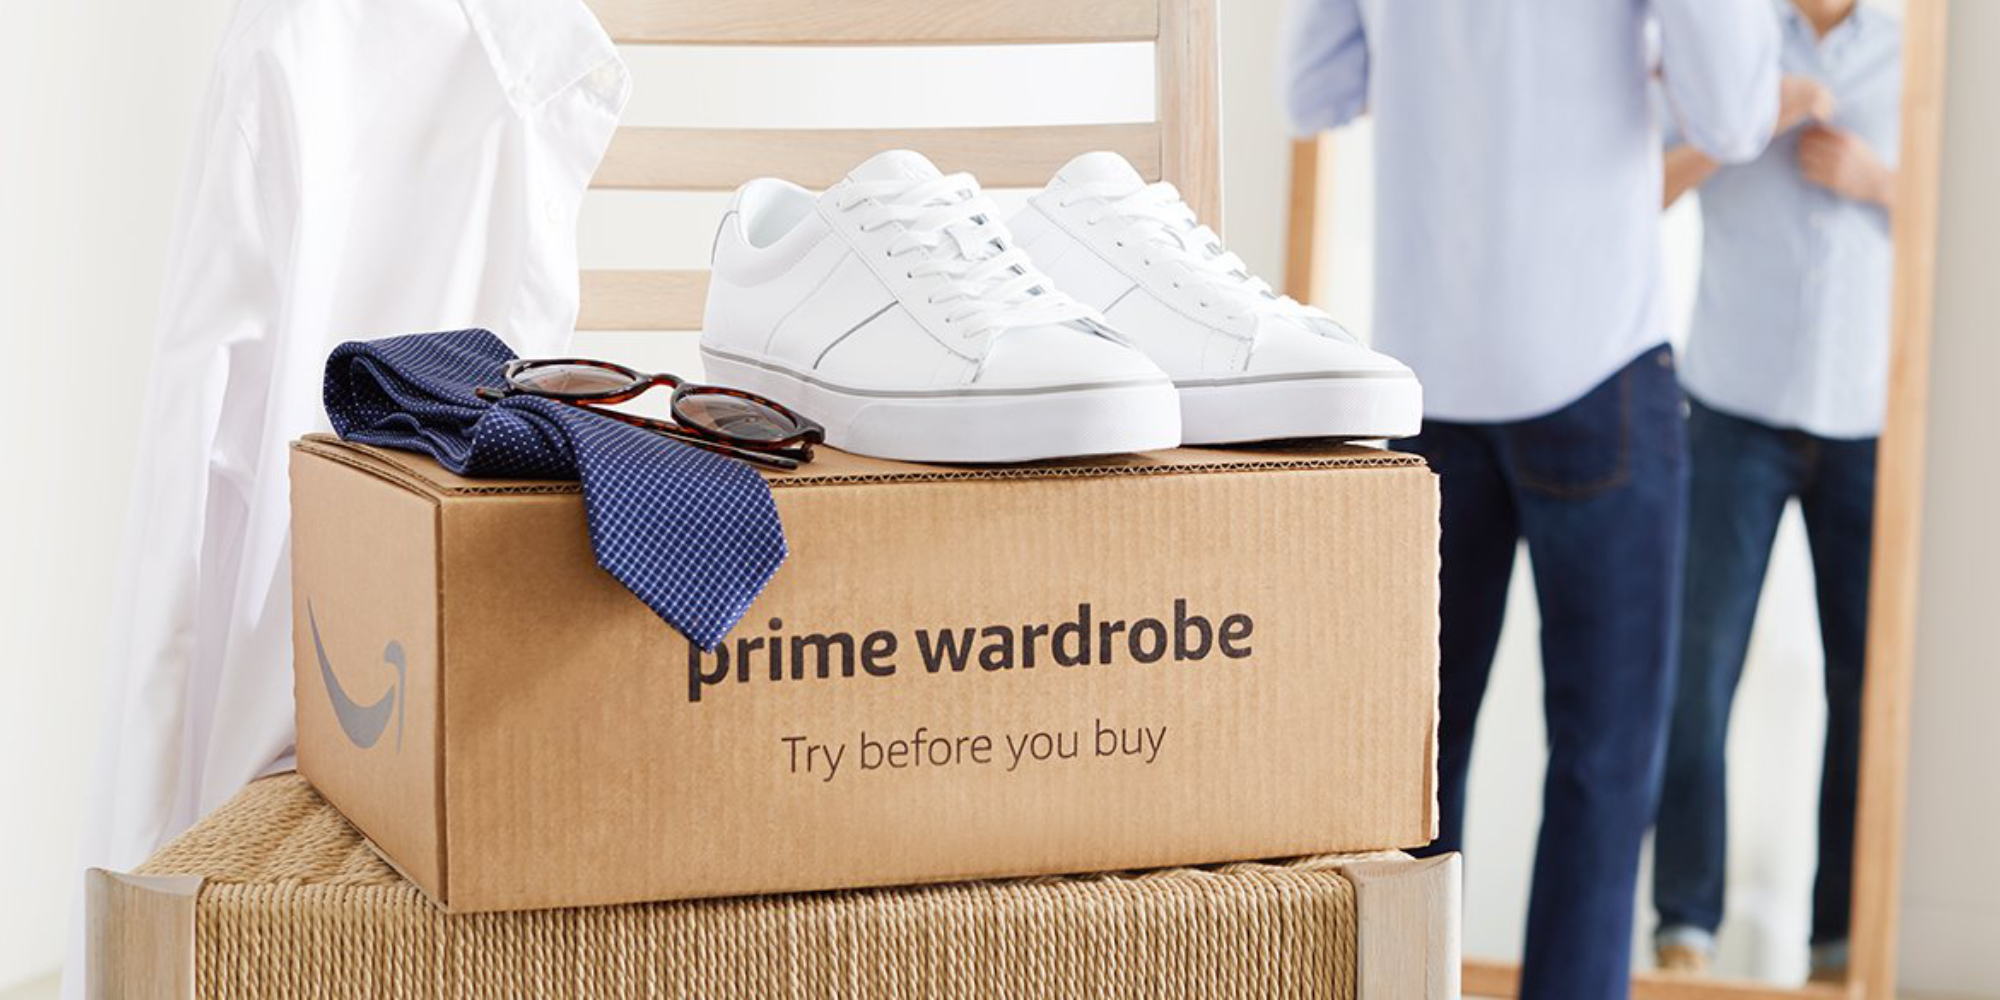 Prime Wardrobe: A guide to 's try before you buy clothing service